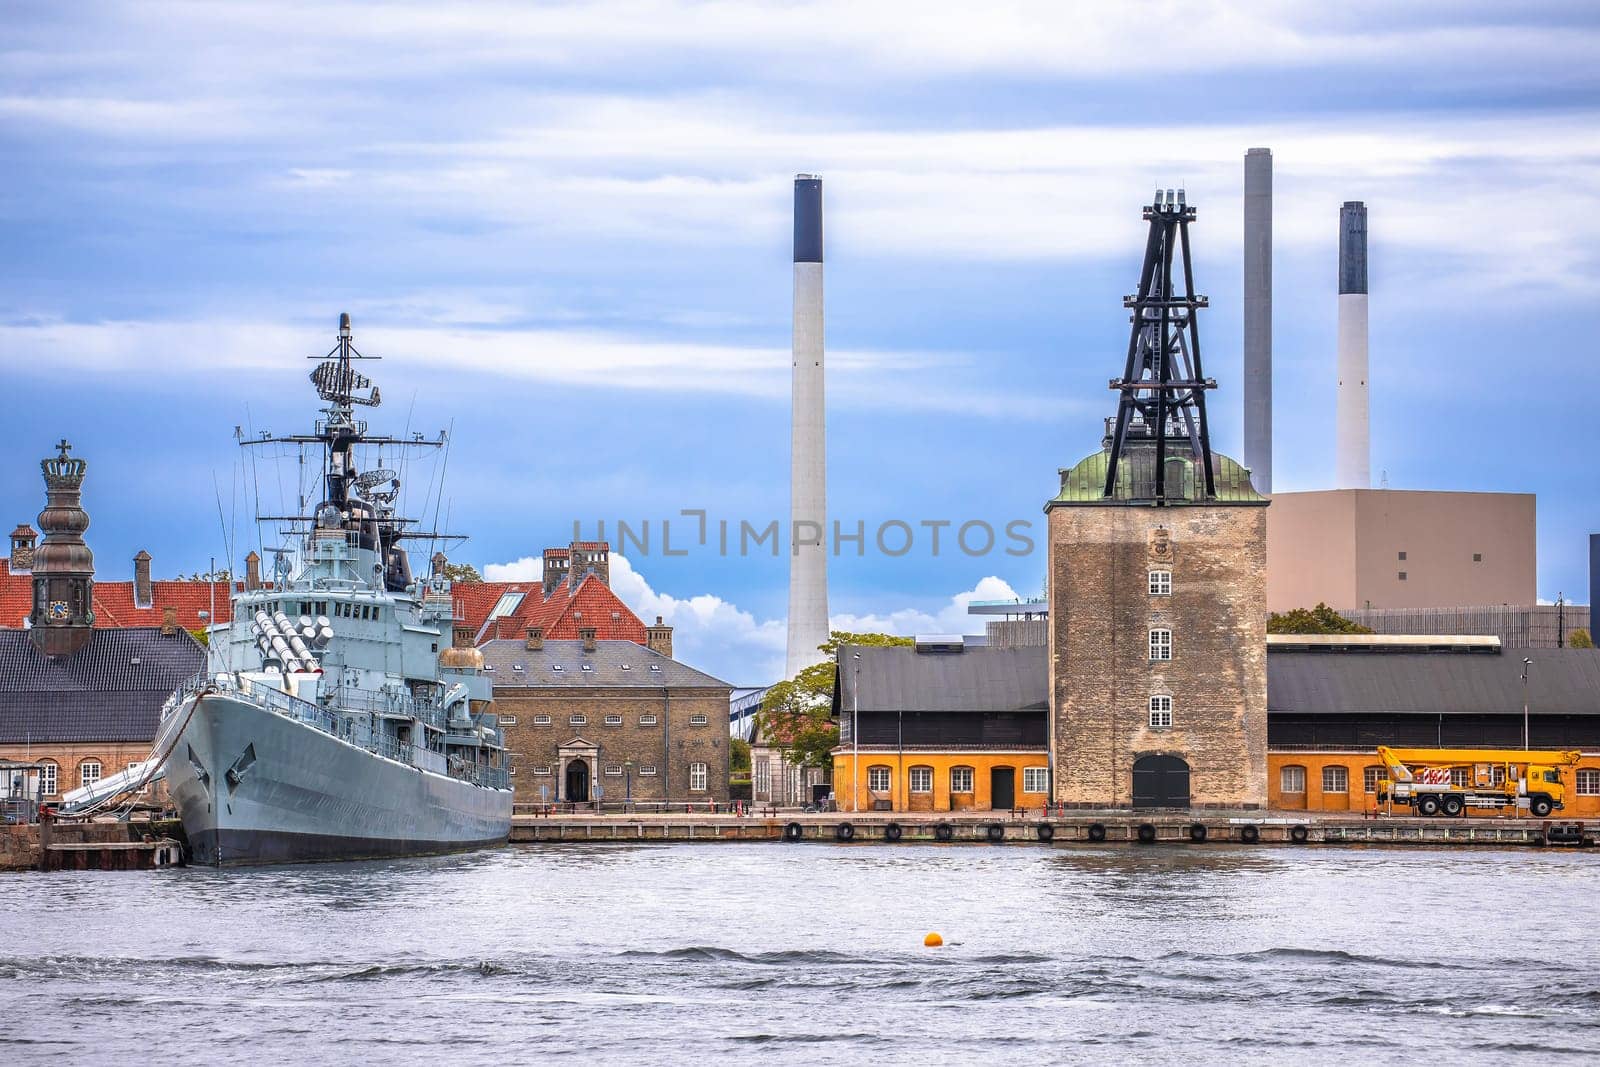 The Ships on Holmen and Copenhagen waterfront view, capital of Denmark